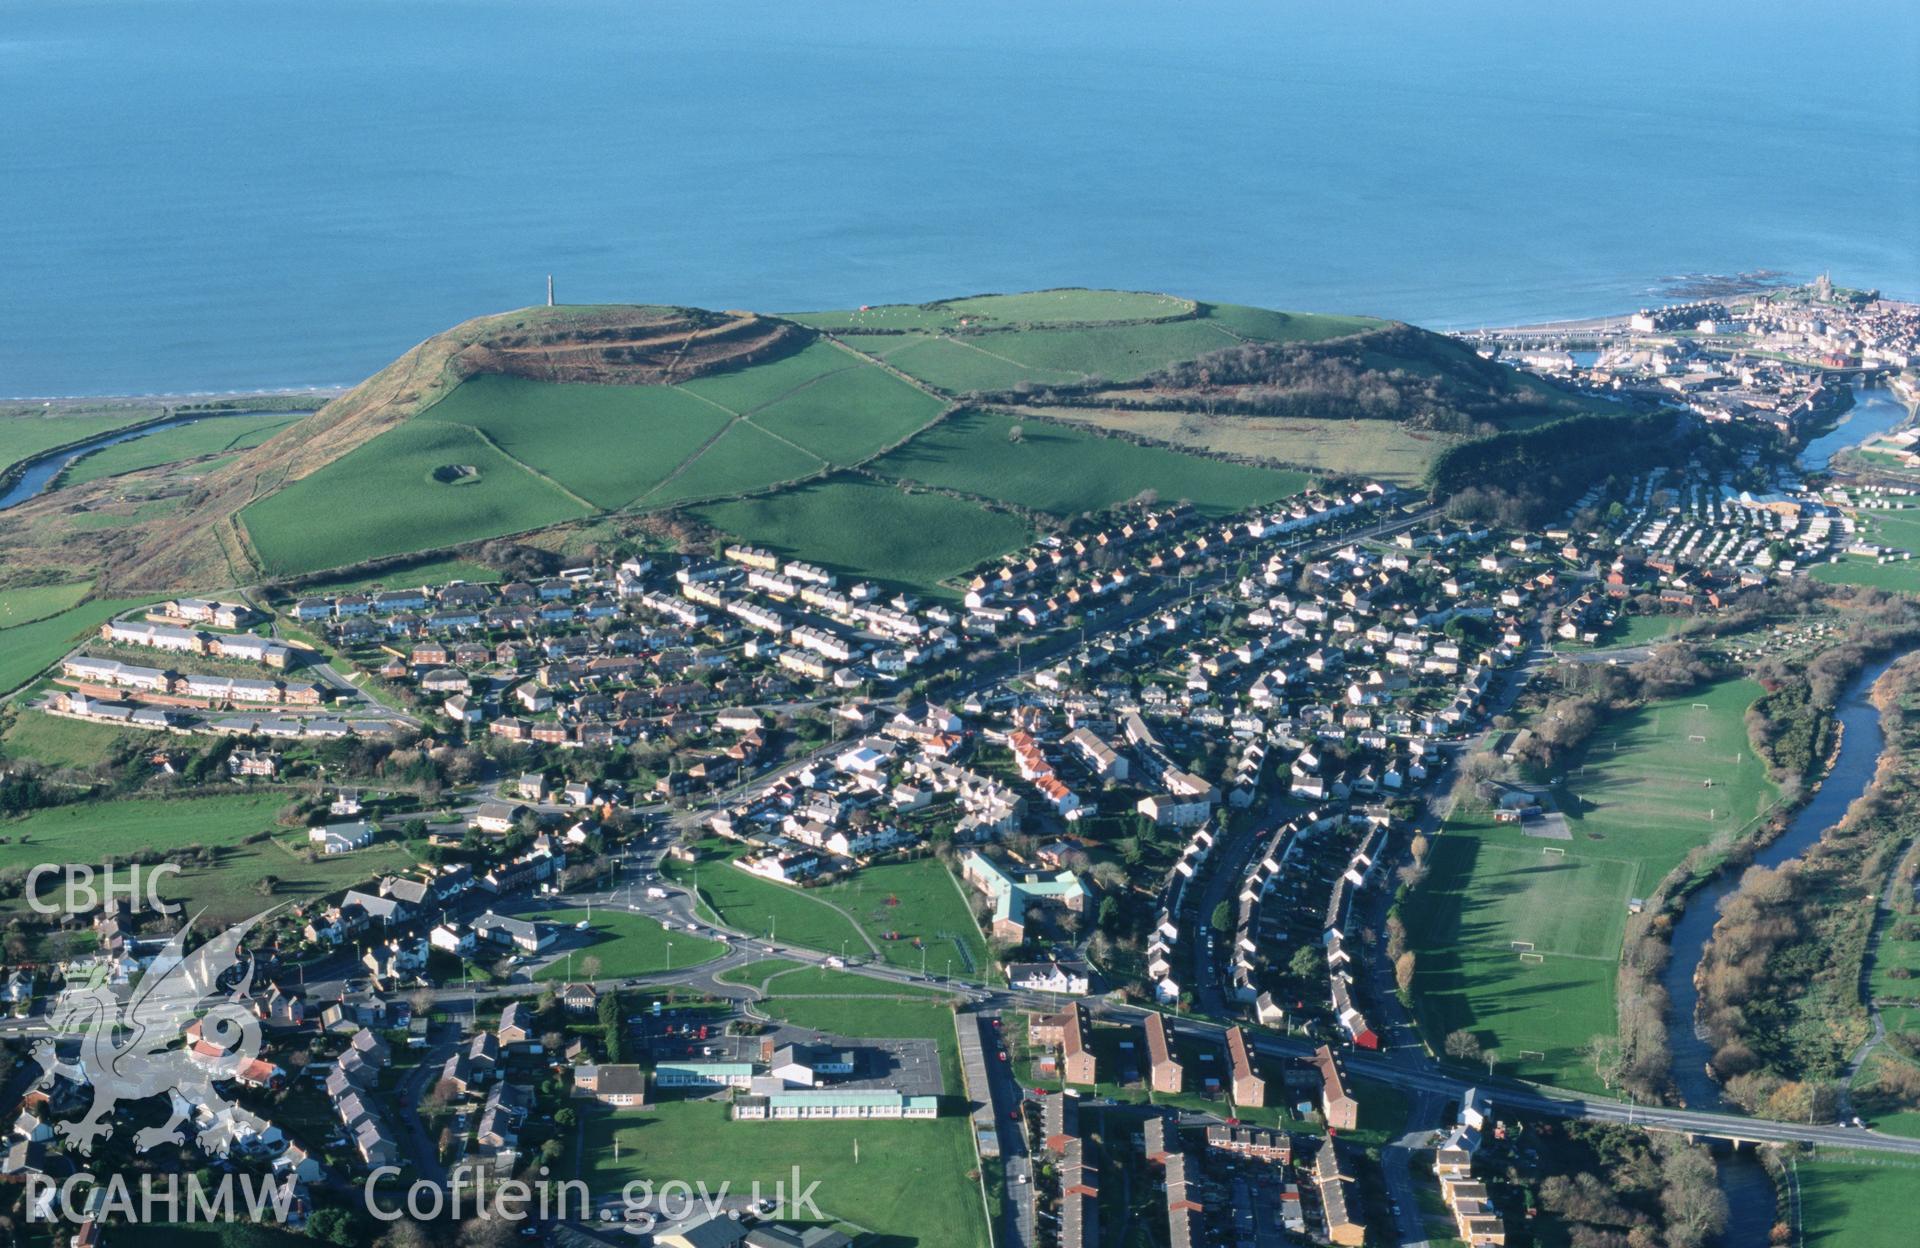 Slide of RCAHMW colour oblique aerial photograph of Aberystwyth Penparcau, taken by T.G. Driver, 10/12/2001.